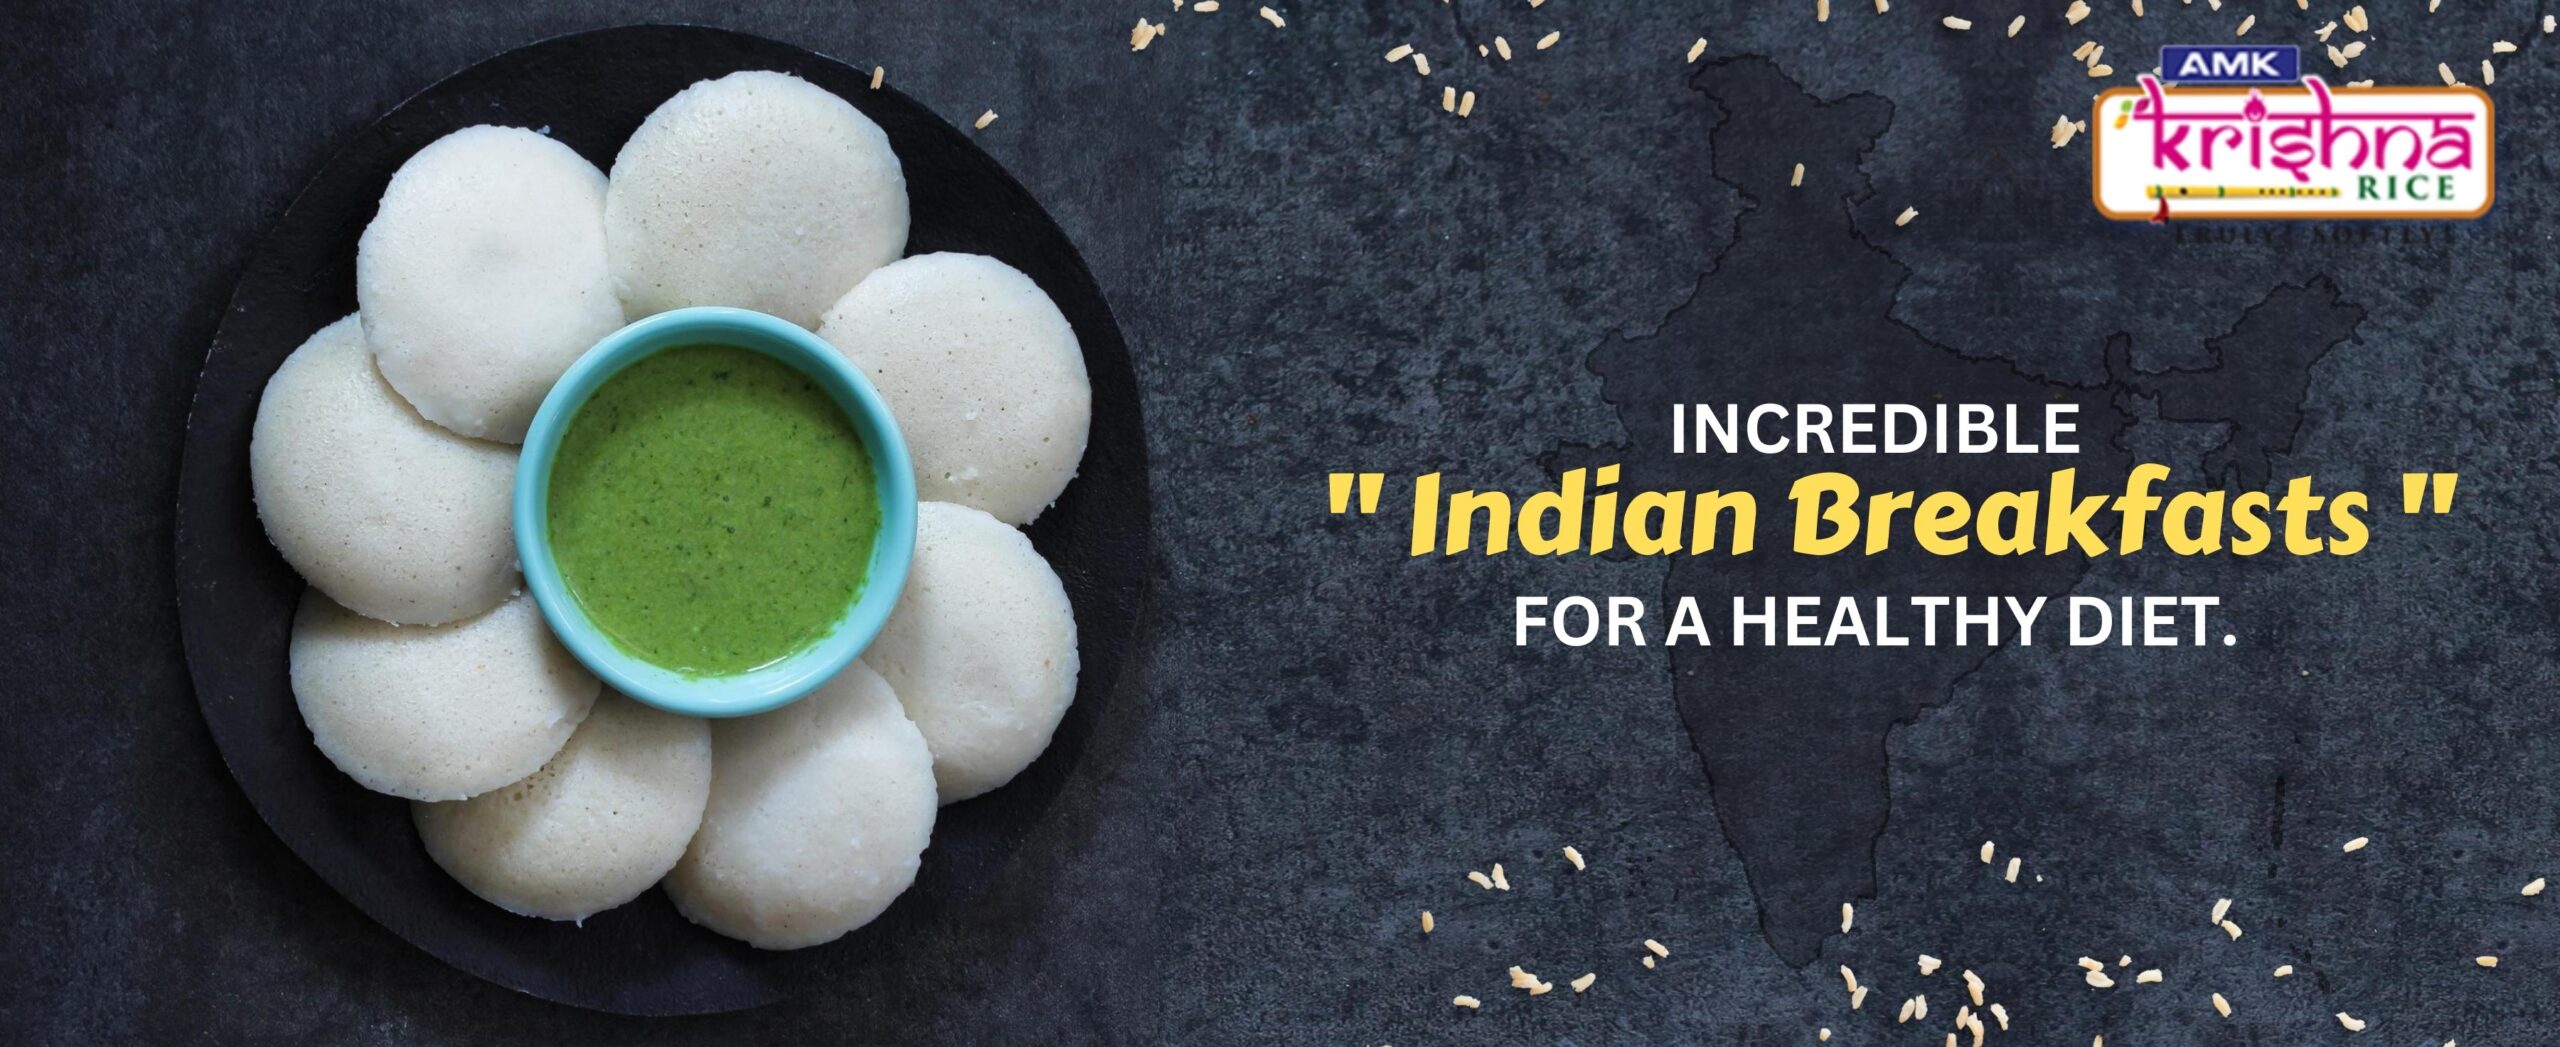 Incredible Indian Breakfasts for a Healthy Diet 